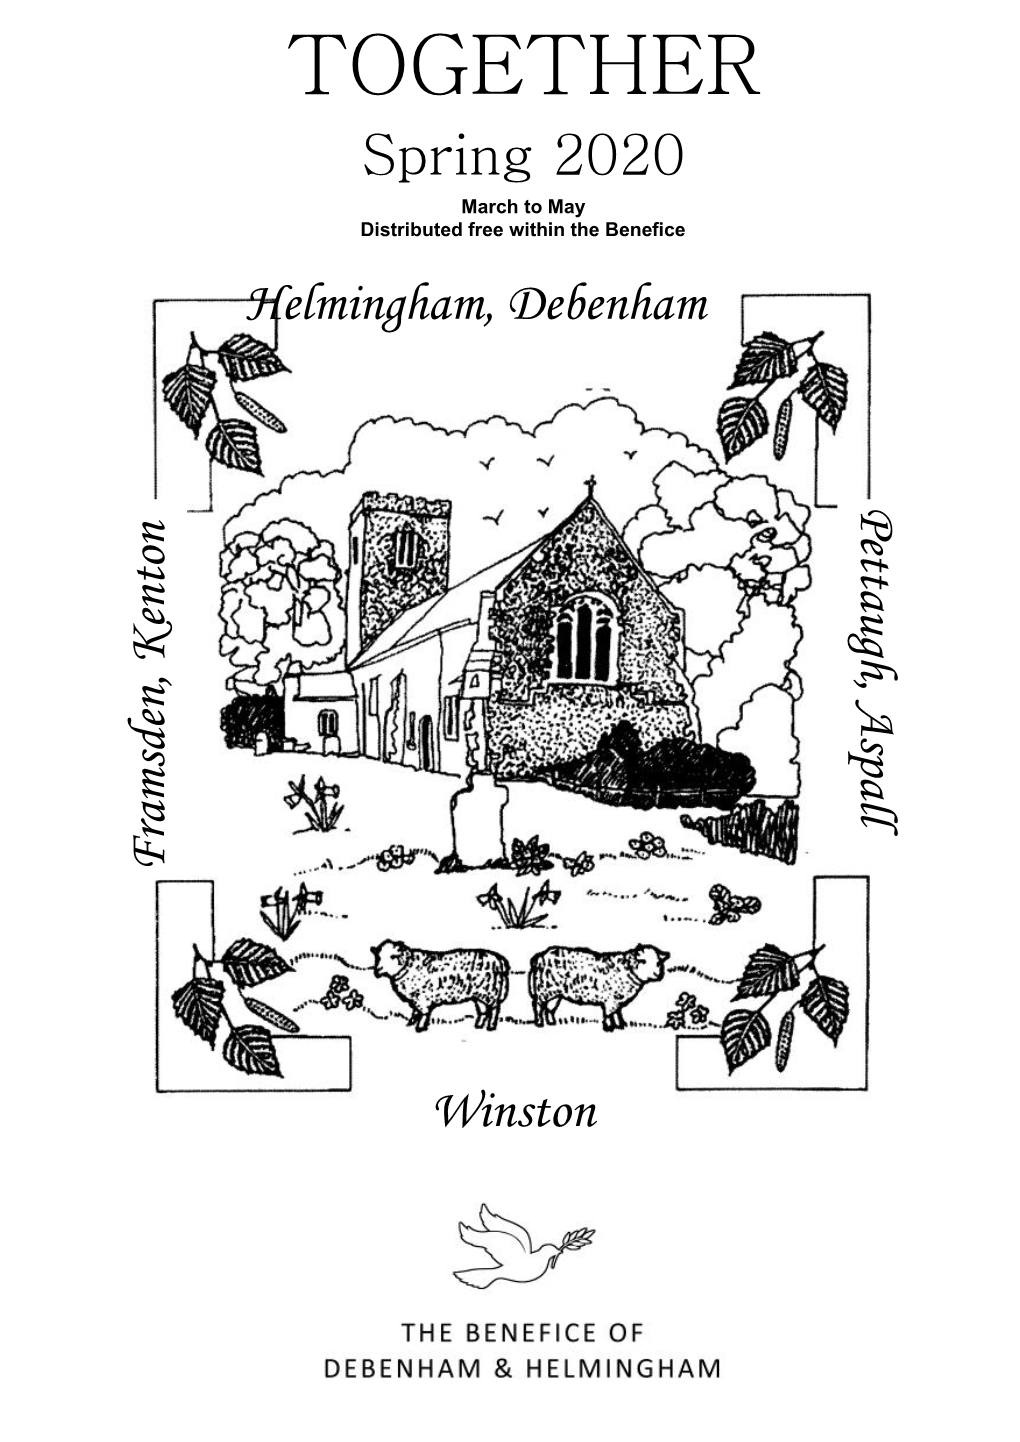 TOGETHER Spring 2020 March to May Distributed Free Within the Benefice Helmingham, Debenham